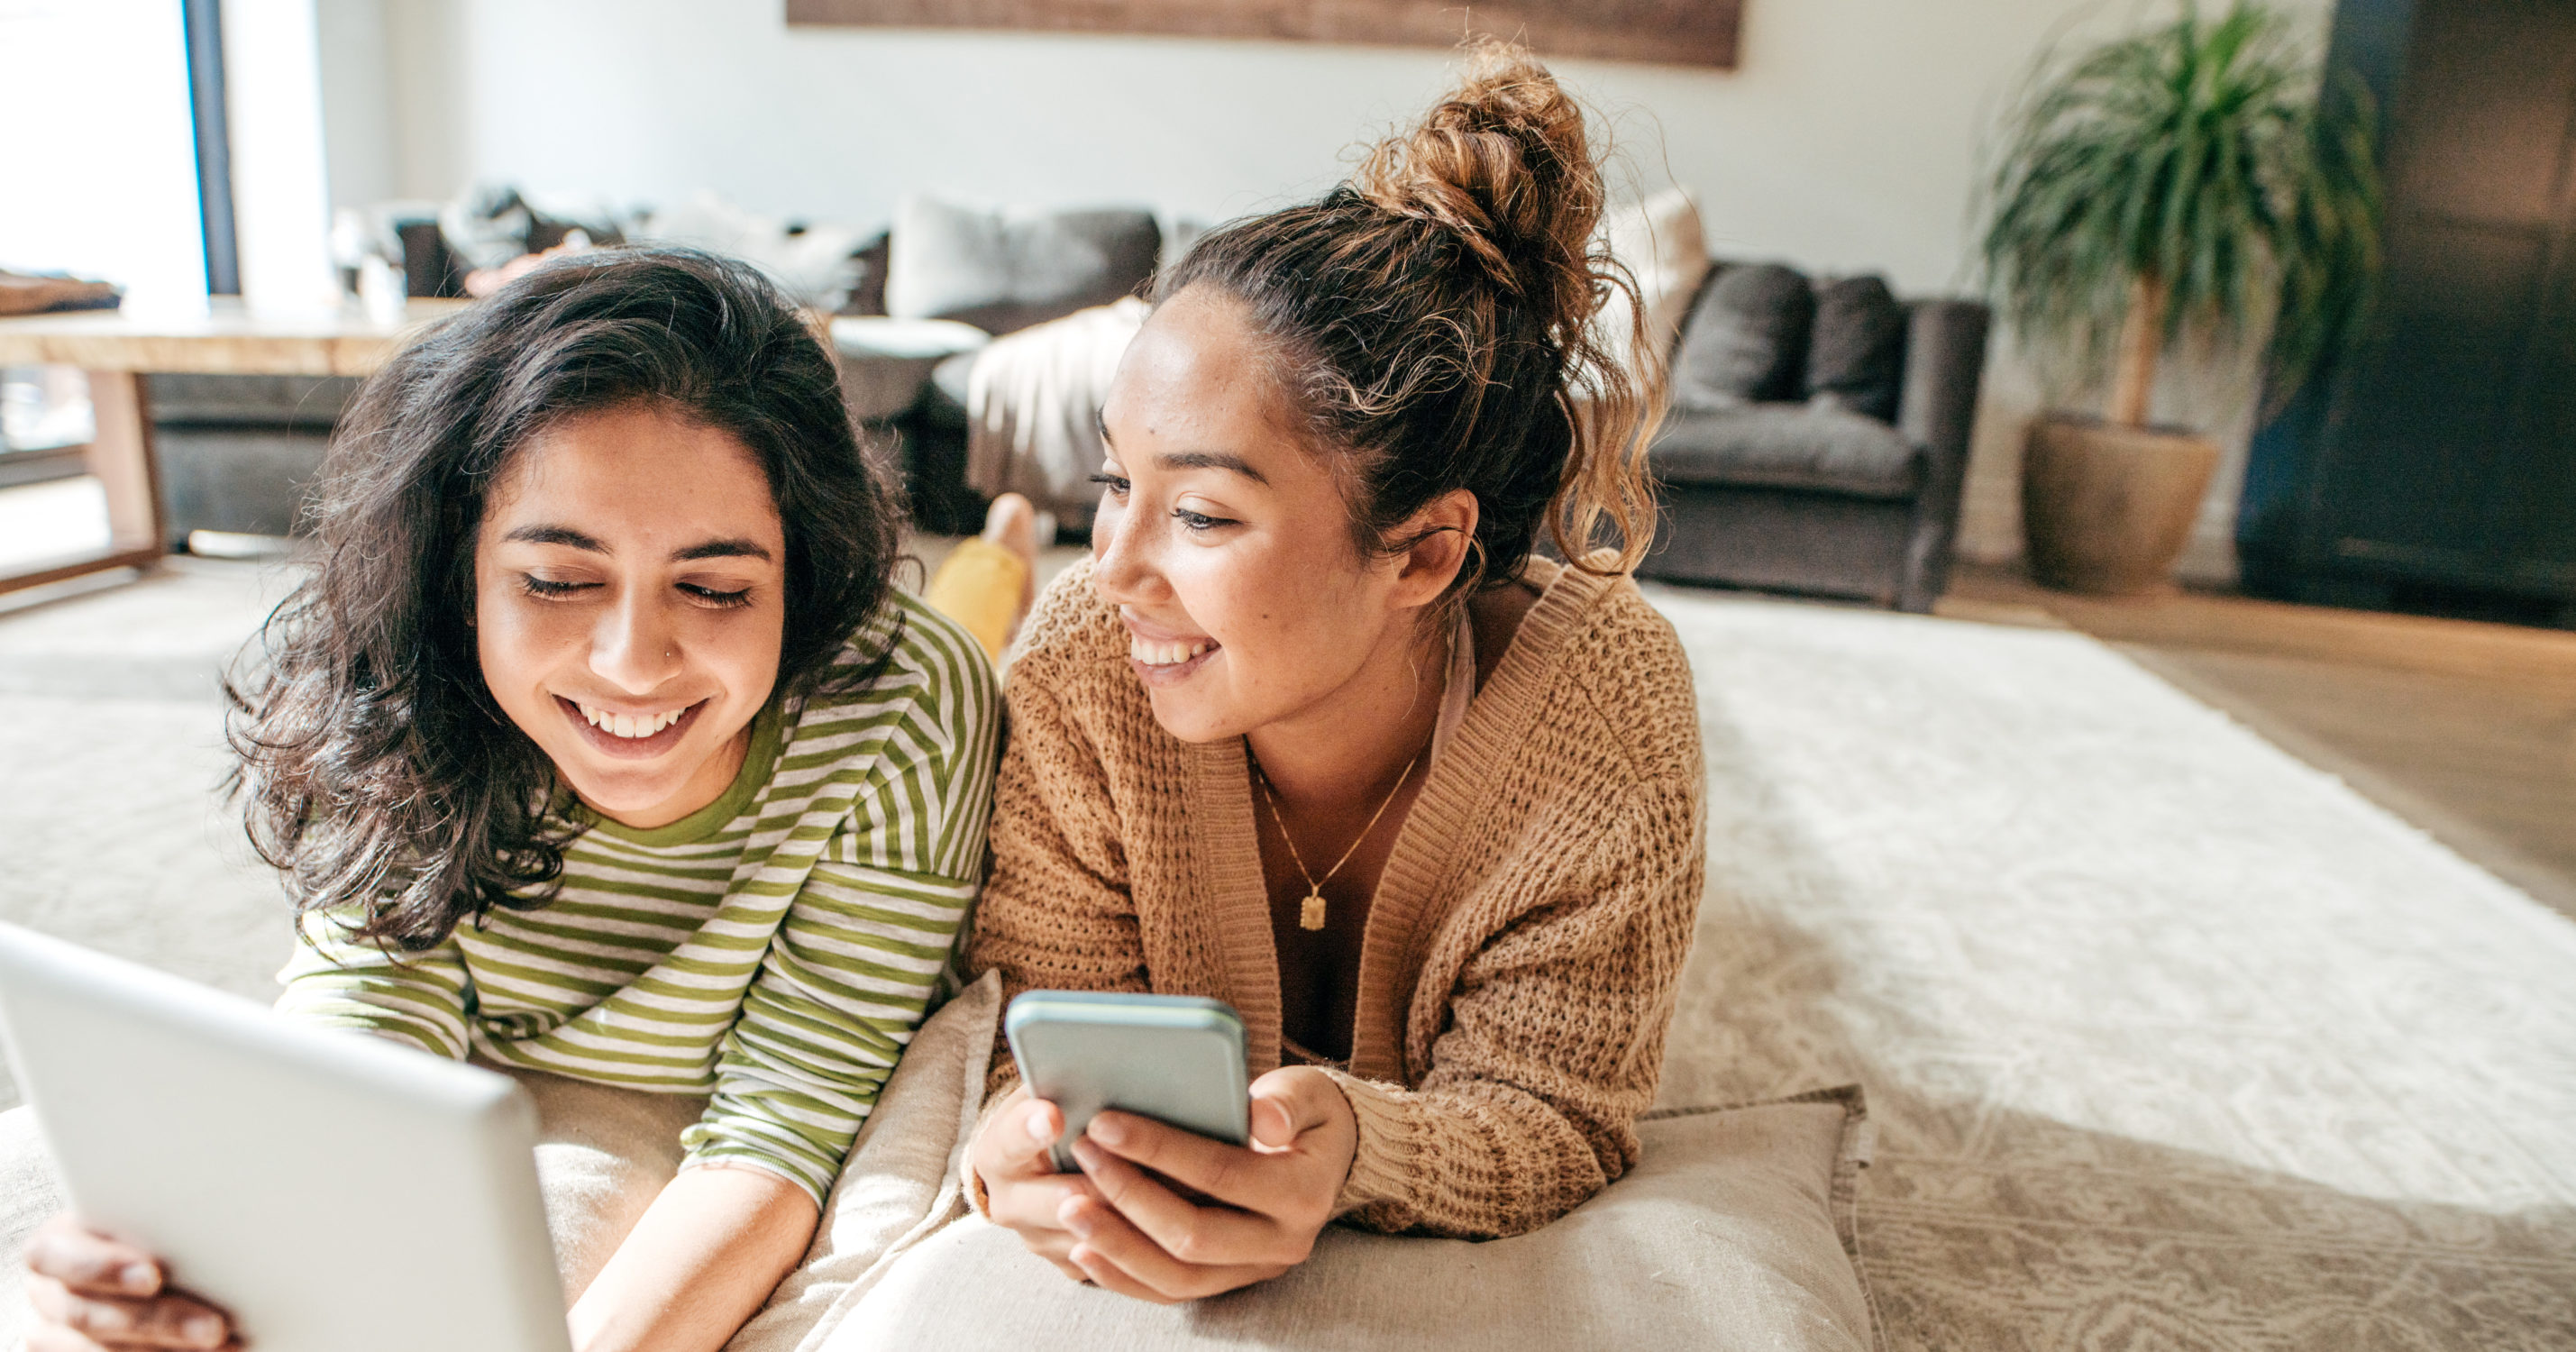 Catching Zs: Gen Z Insights and How Brands Connect with Them